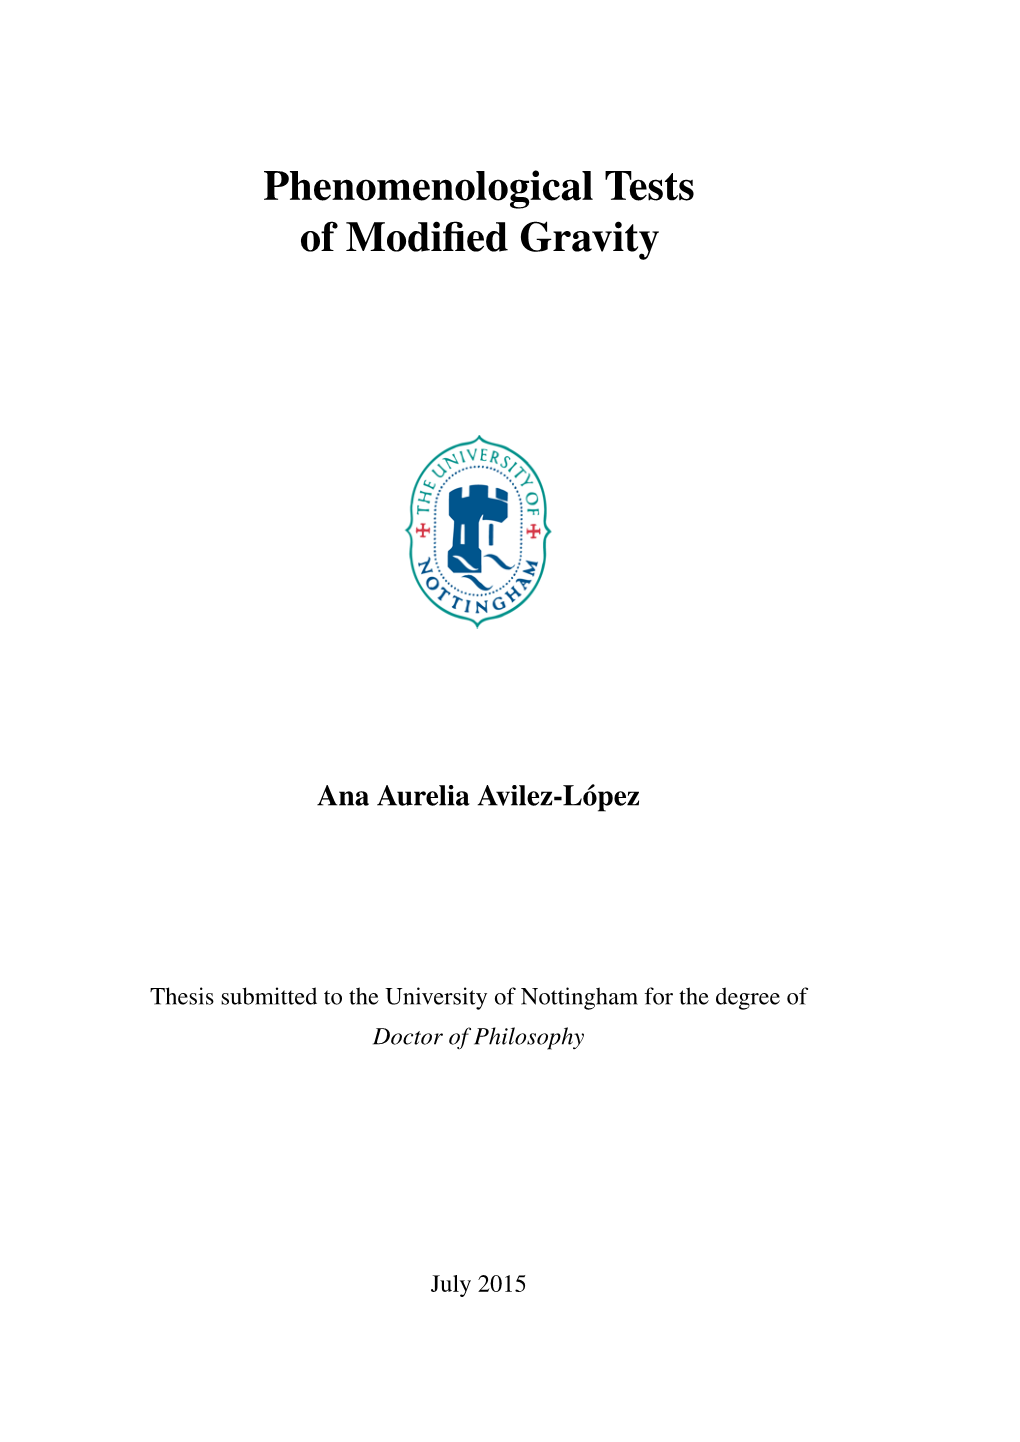 Phenomenological Tests of Modified Gravity